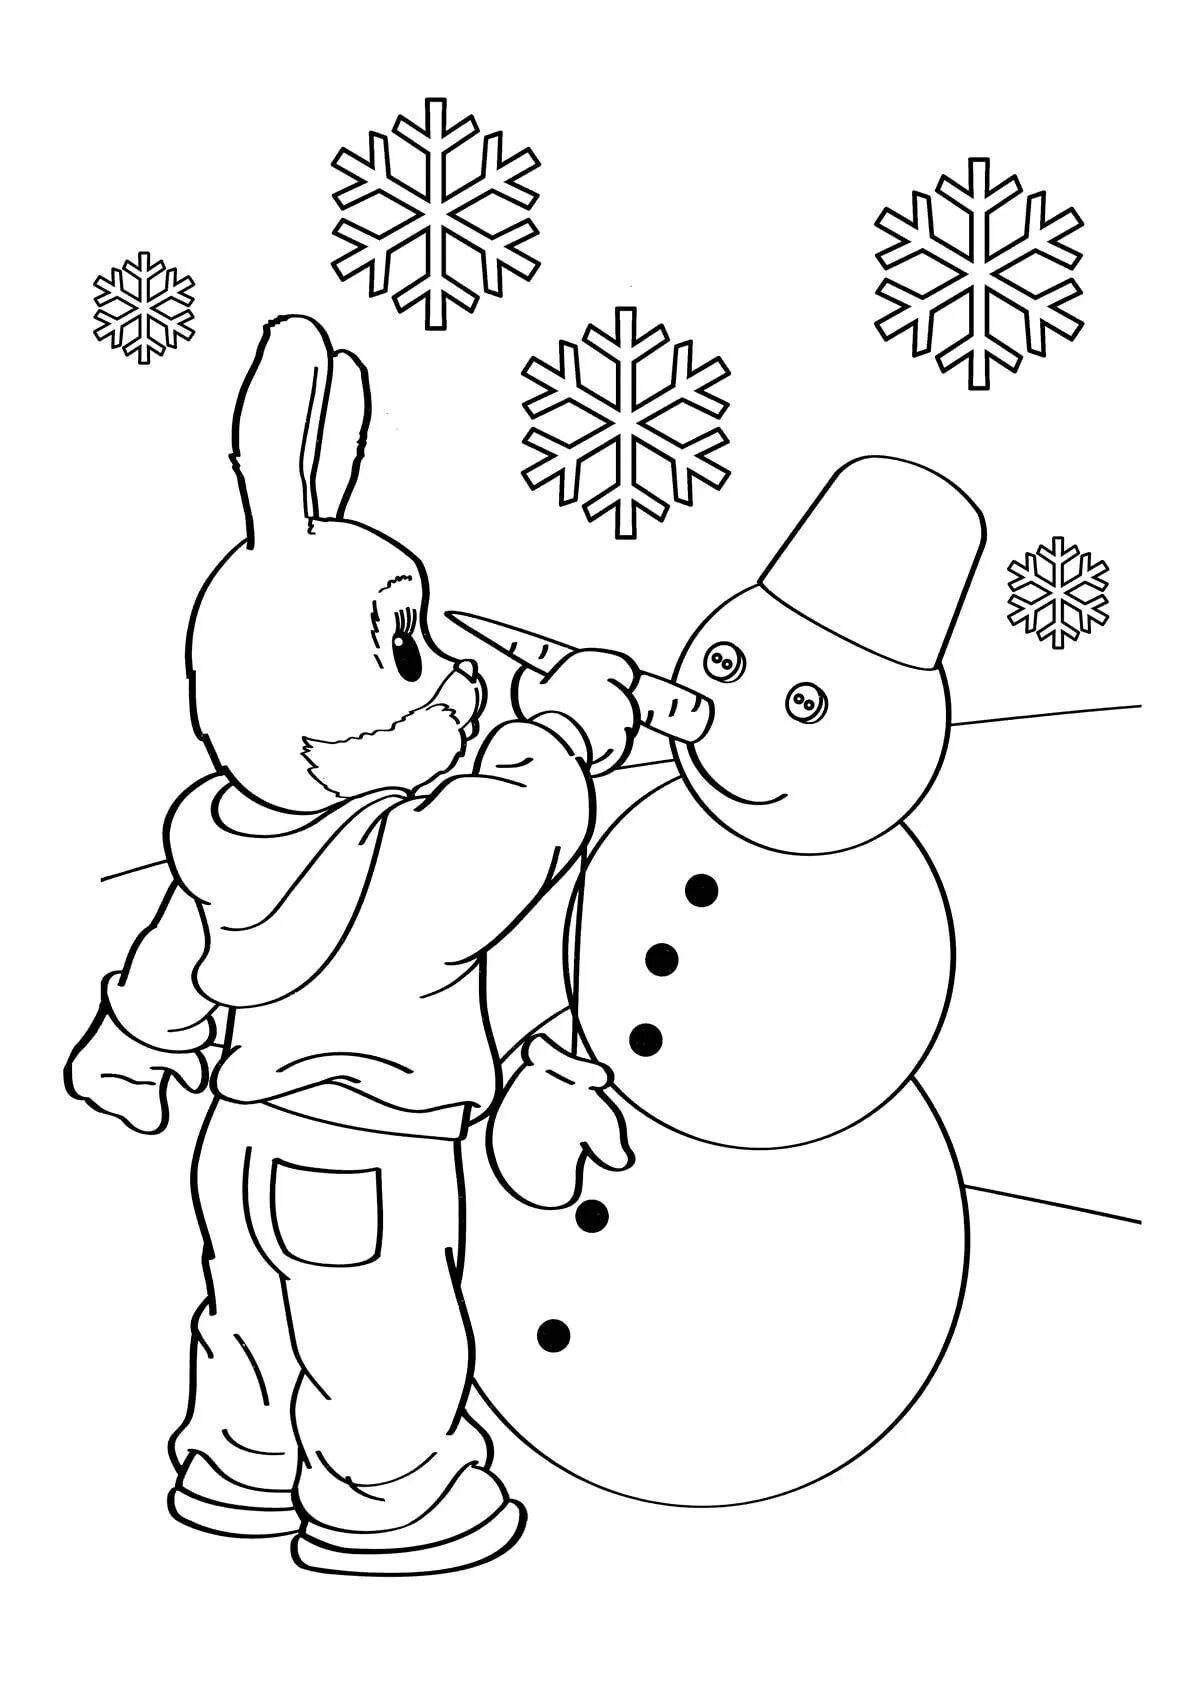 Fun coloring winter for children 4 years old